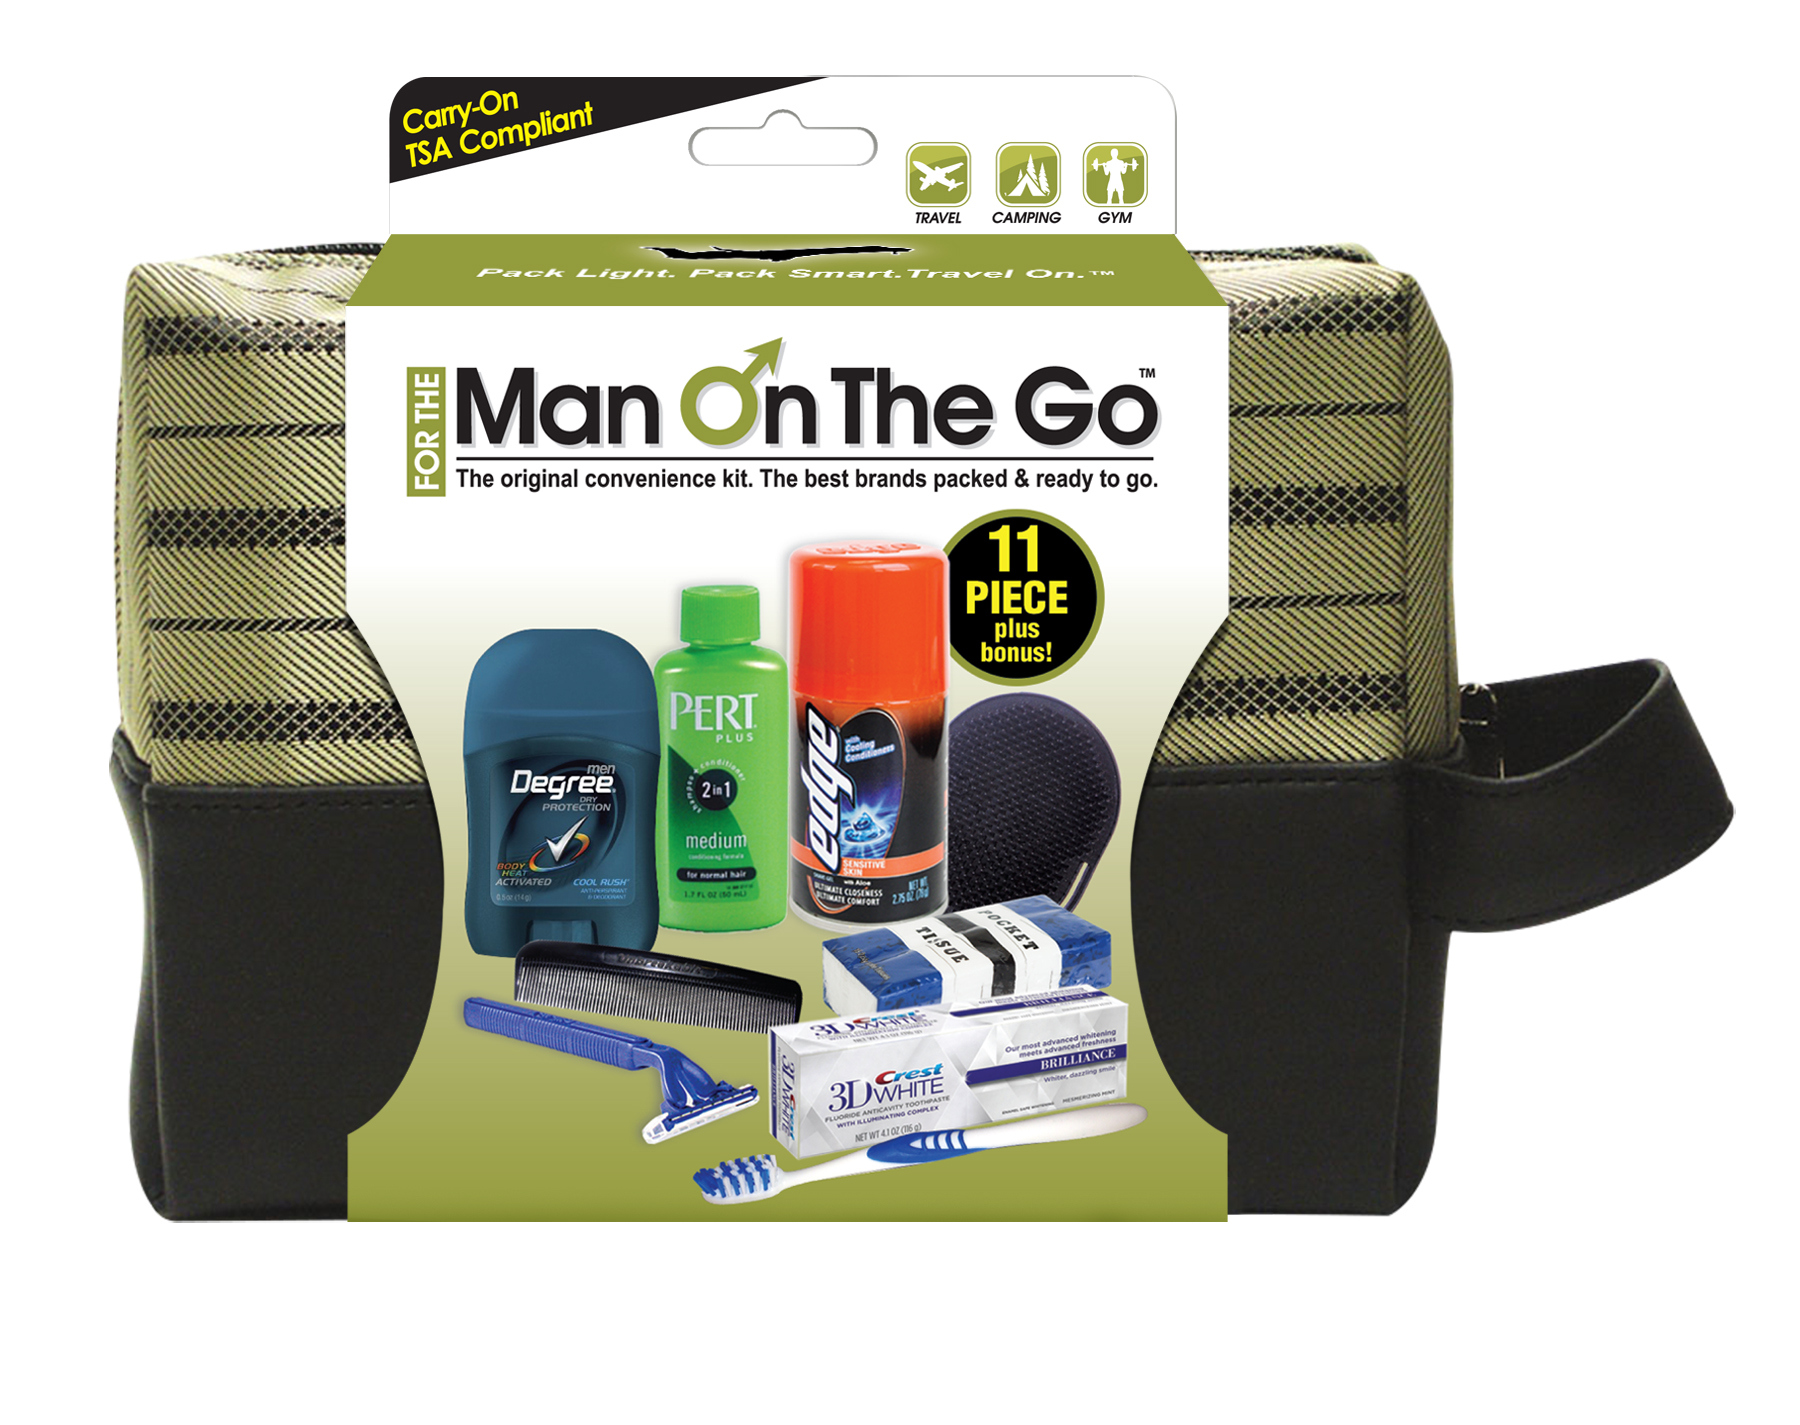 the man company 10 in 1 travel kit